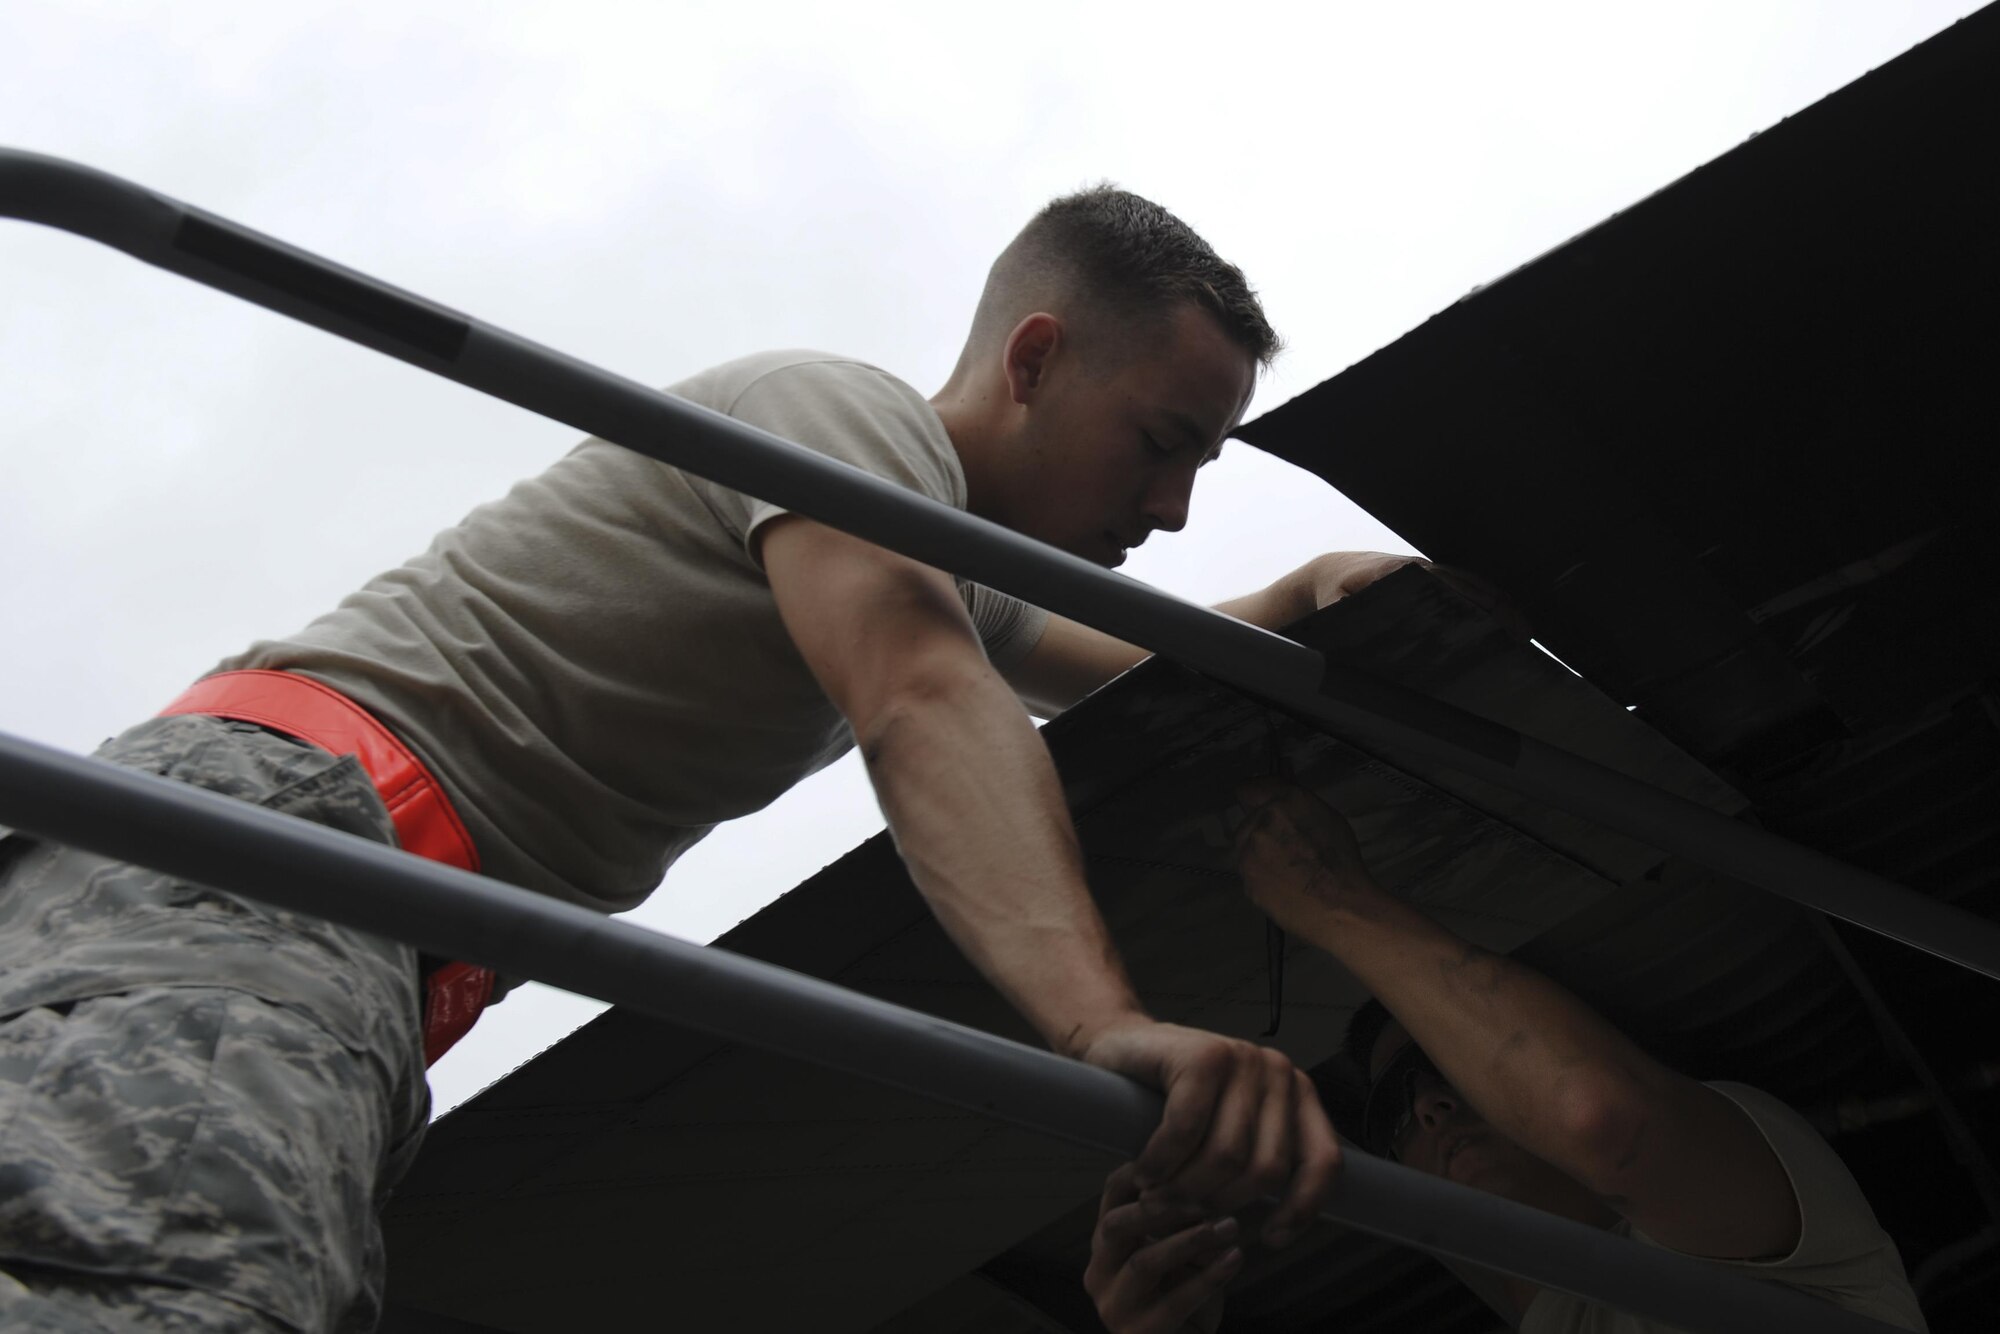 Airmen 1st Class Austin Luke, left, and Daniel Goerdt, crew chiefs with the 4th Aircraft Maintenance Unit, install a flat baffle onto the wing of an AC-130U Spooky gunship at Hurlburt Field, Fla., May 19, 2017. A flat baffle keeps turbulence to a minimum and aerodynamics to a maximum as the aircraft and its crew conduct special operations worldwide. (U.S. Air Force photo by Airman 1st Class Dennis Spain)